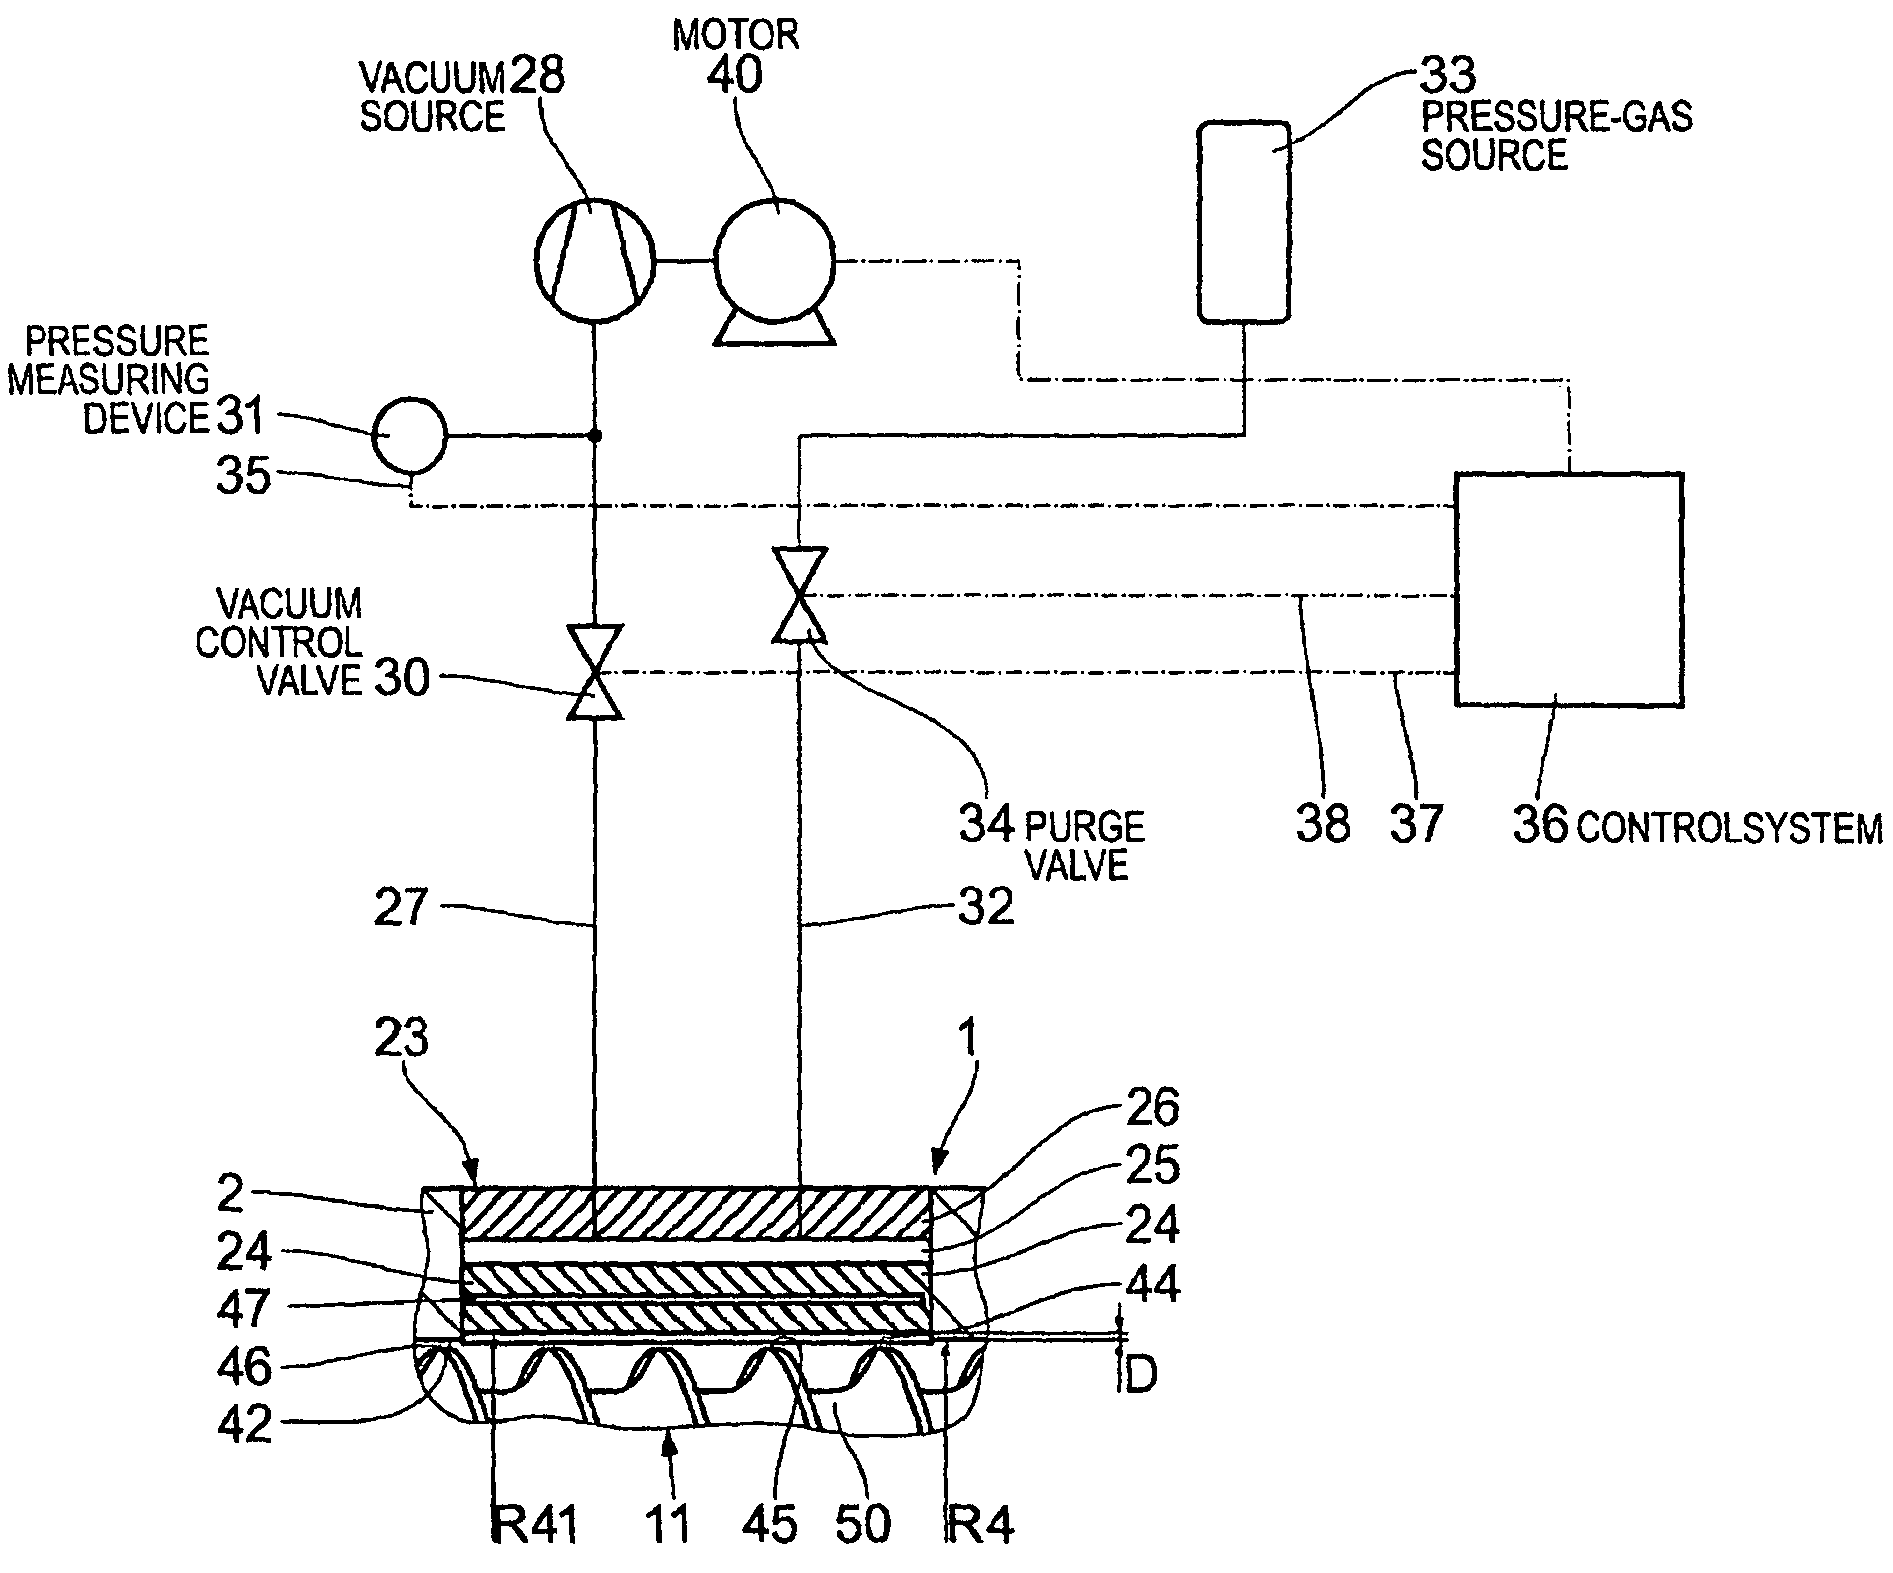 Extruder having a set back gas-permeable wall portion